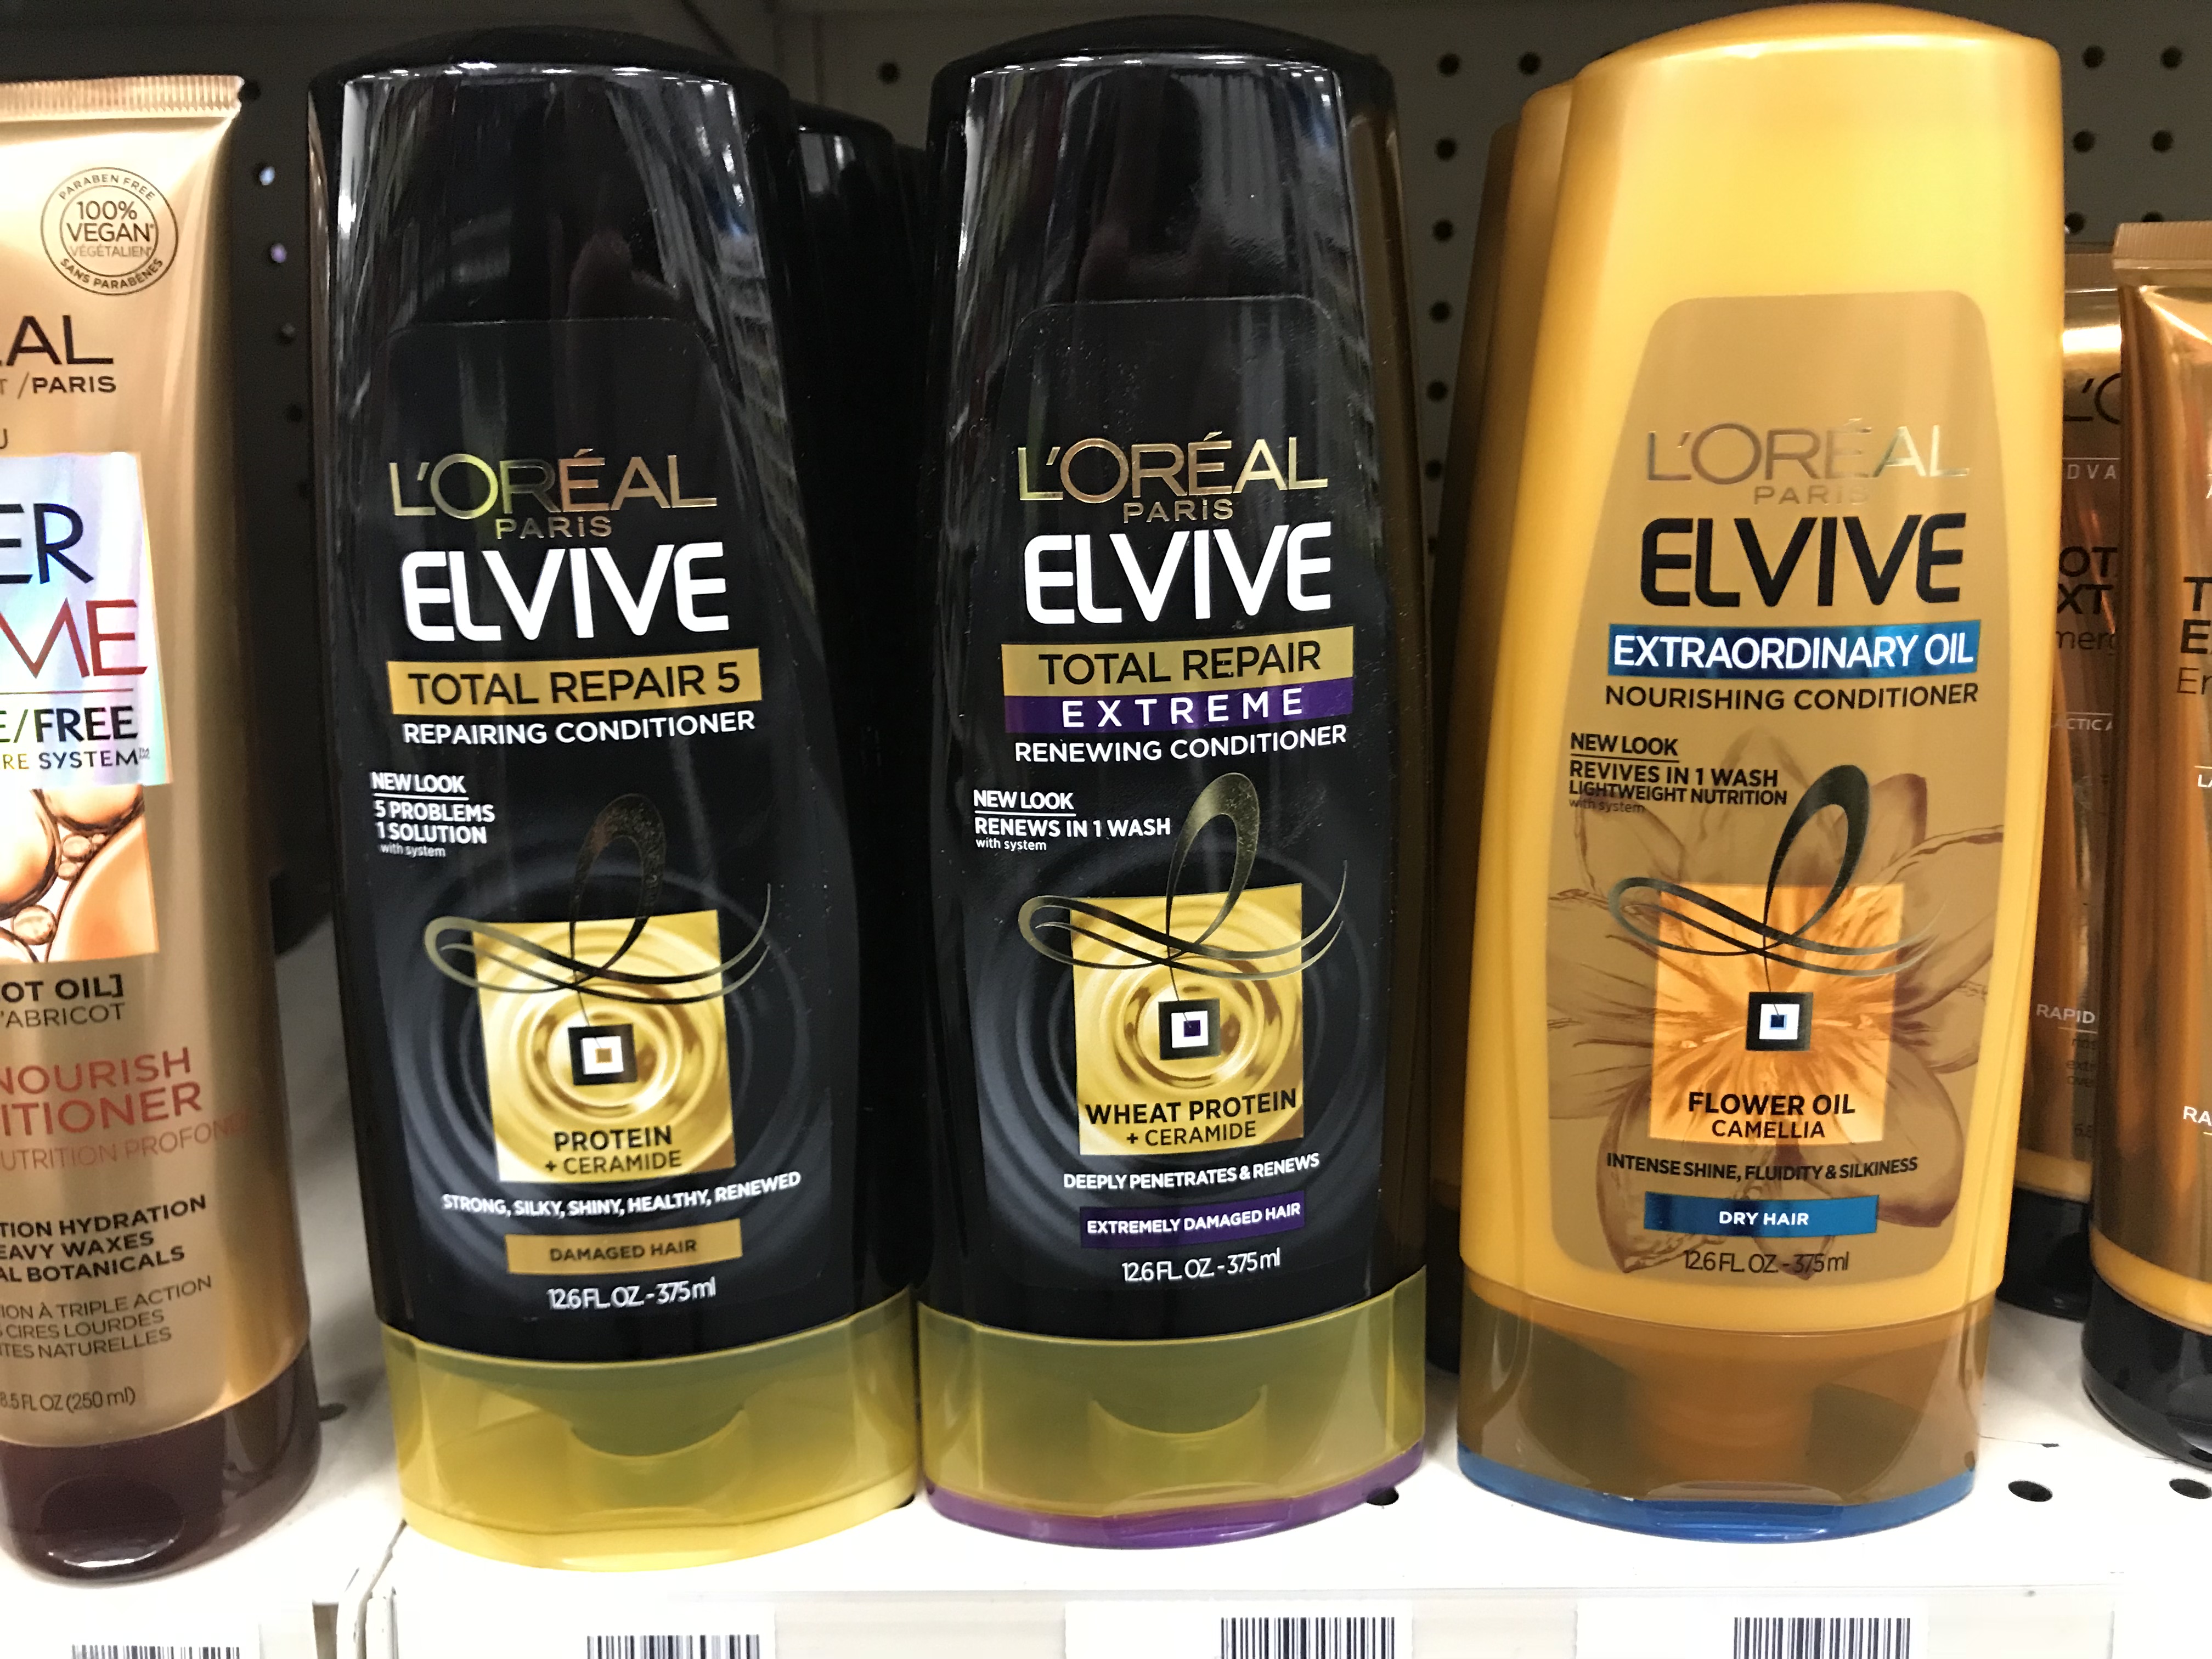 l'oreal elvive conditioners on store shelf